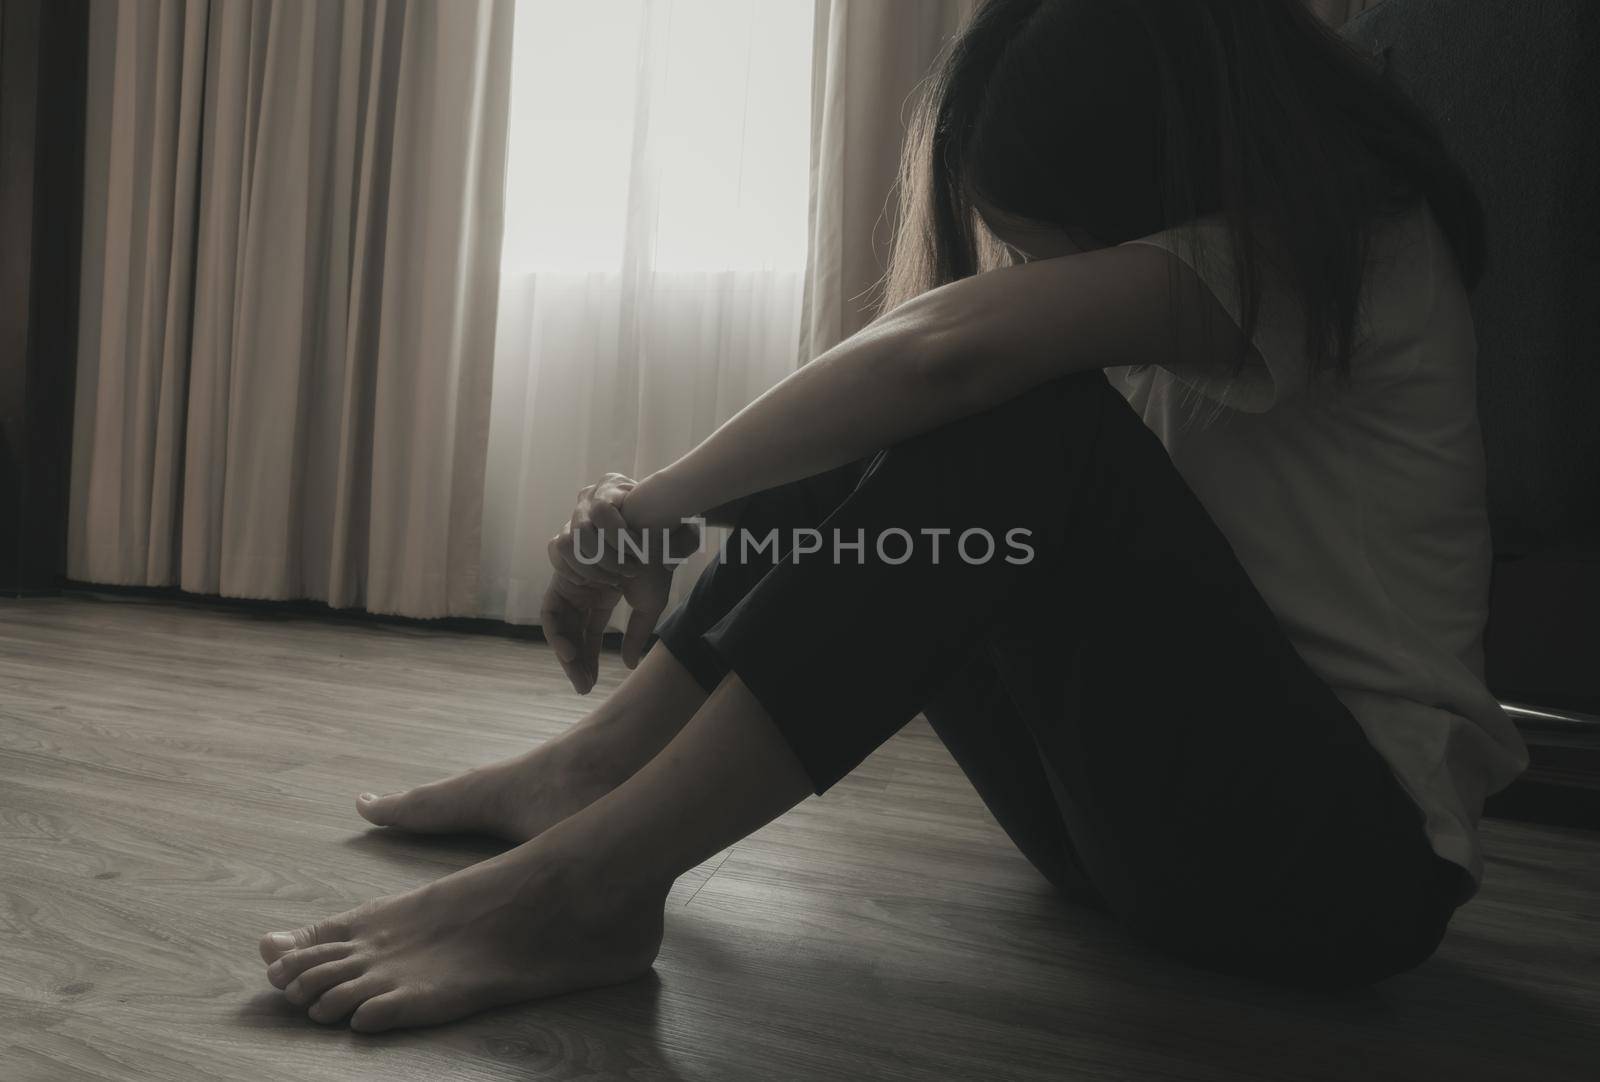 Depressed and stressed woman sitting on the floor near curtains in bedroom. Sad woman sitting in the dark room. Girl with mental health problems. Unhappy life. World Mental Health Day concept.